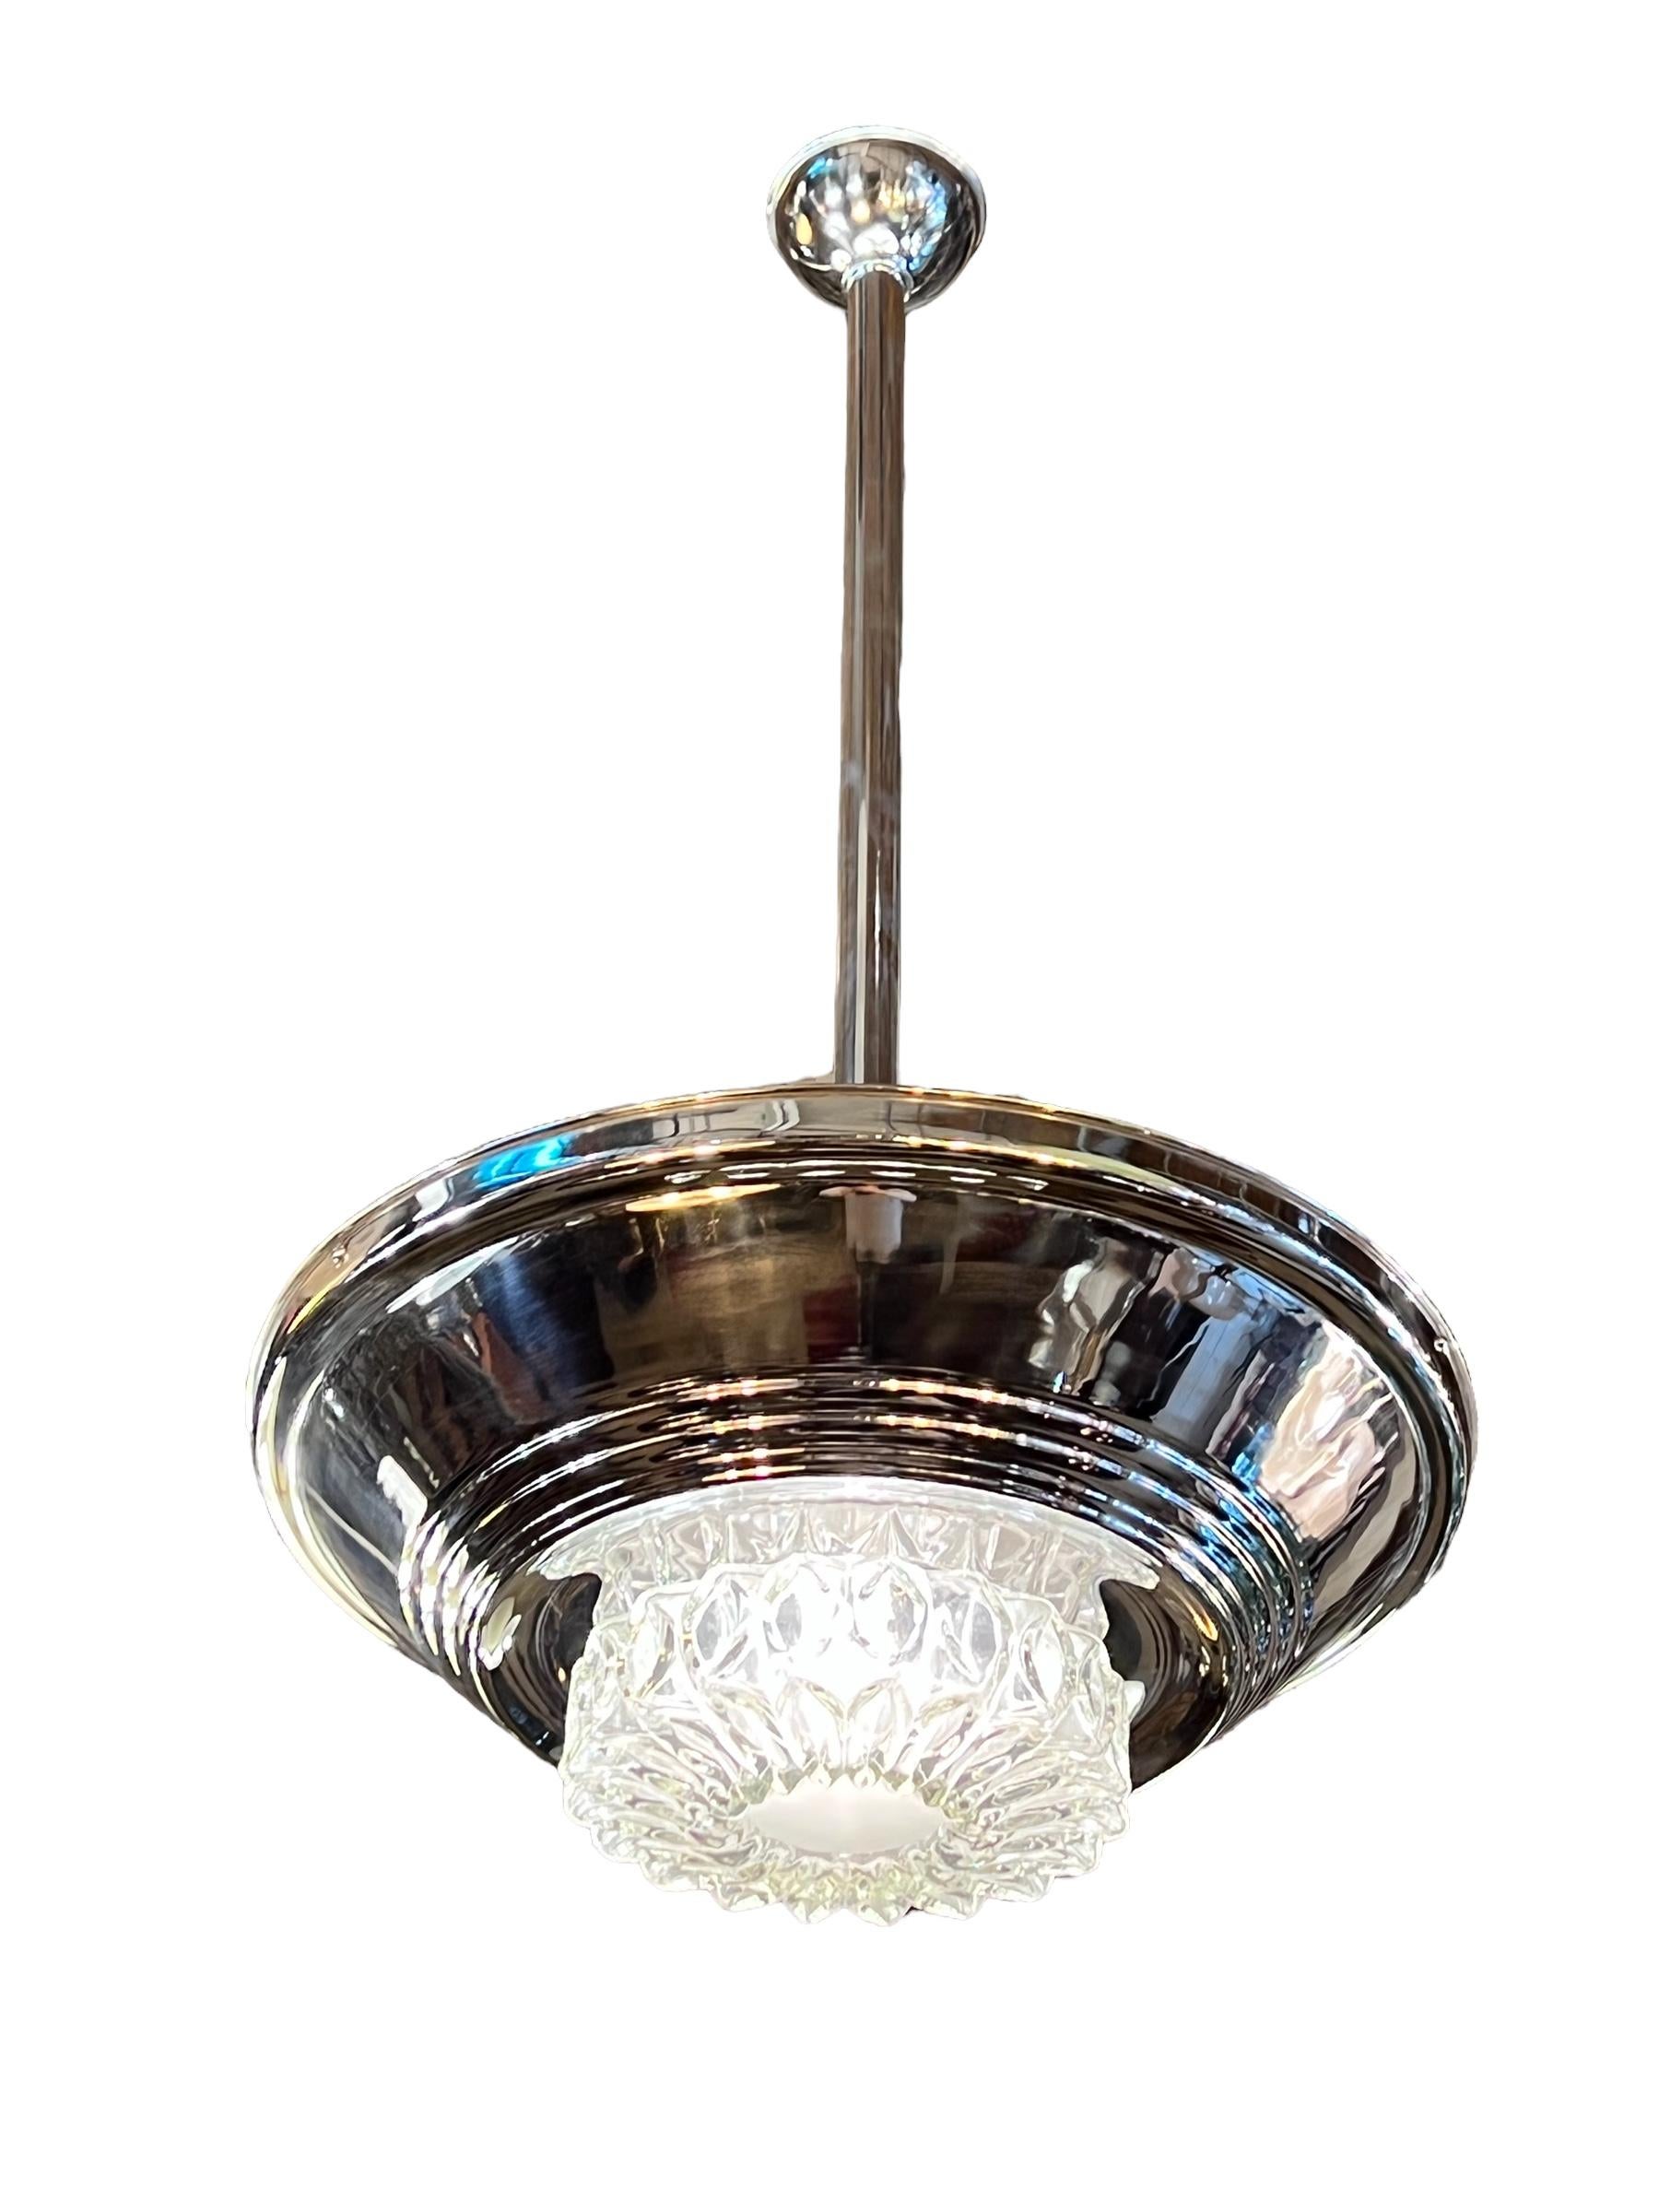 2 Hanging Lamps in Crystal and Chrome, 1950 For Sale 1